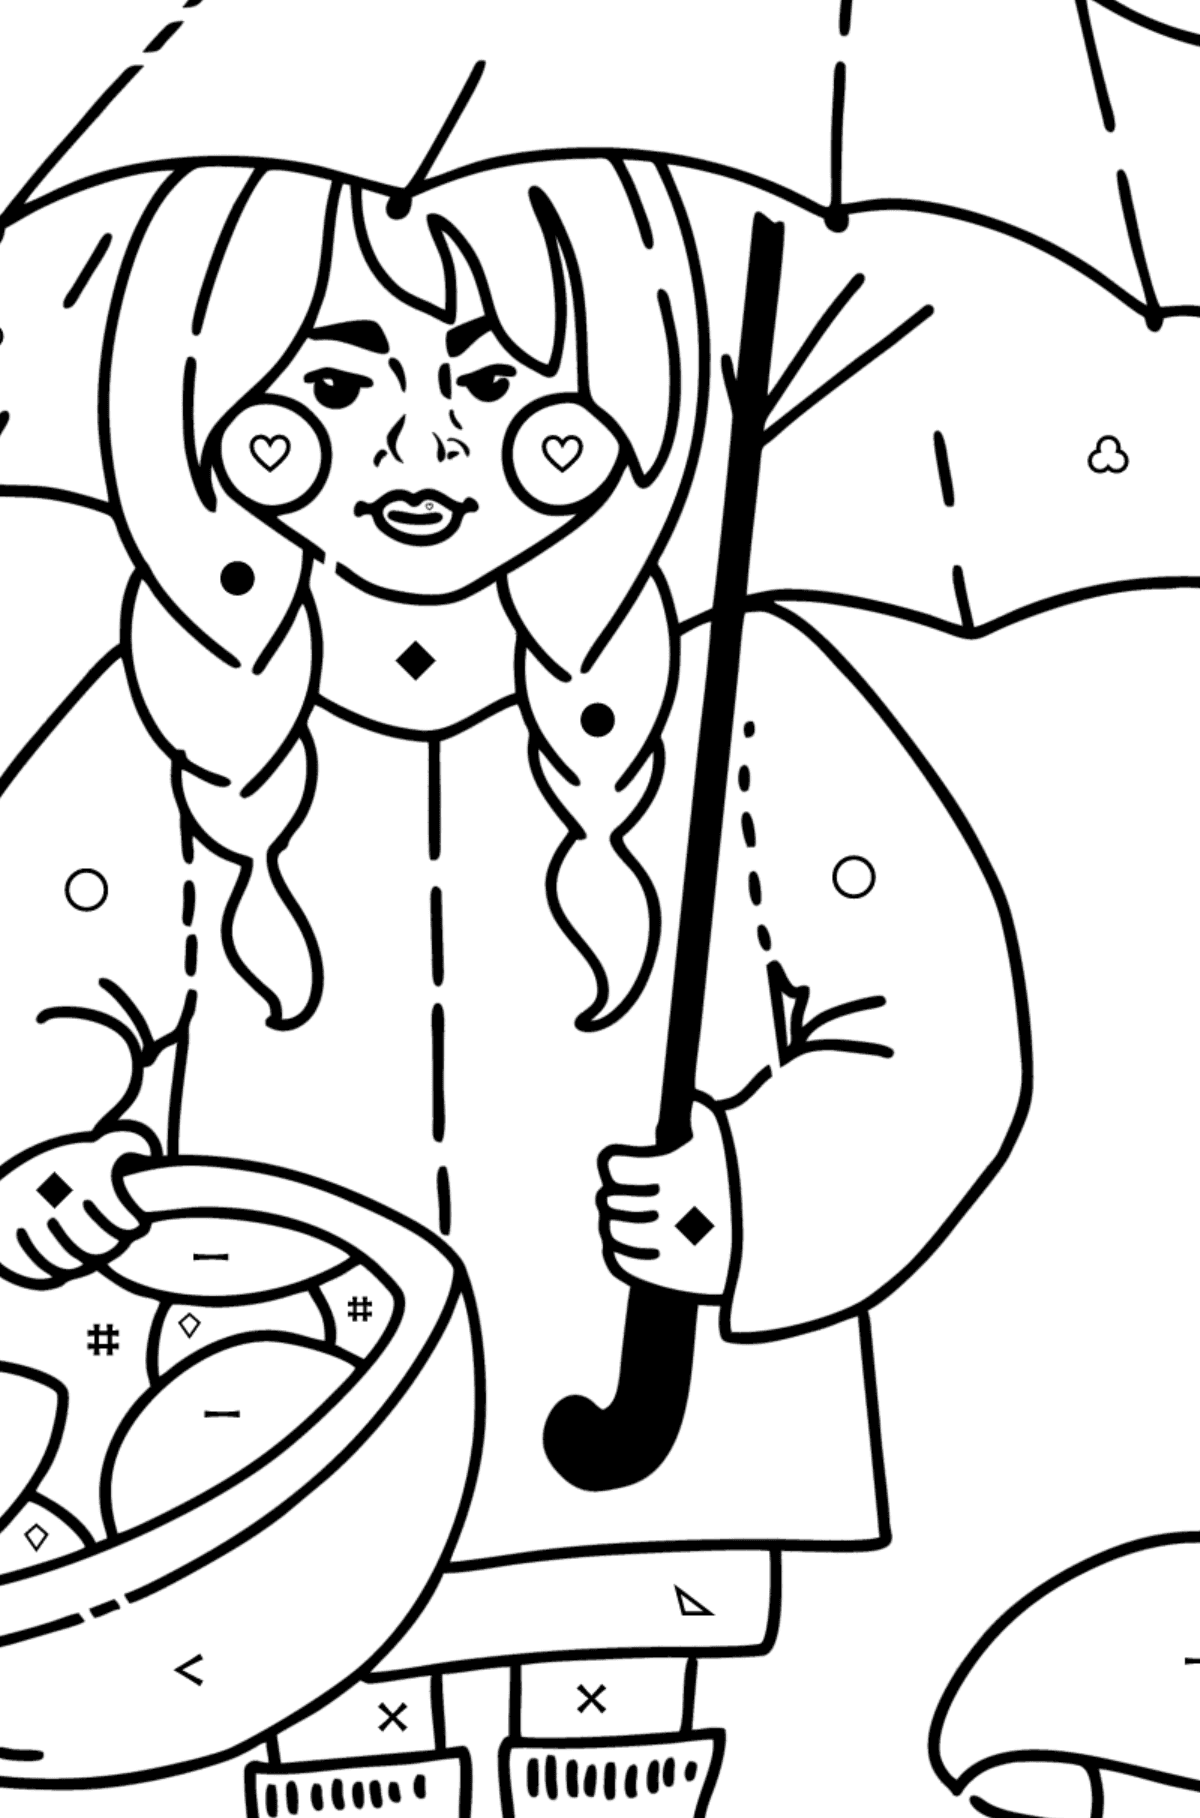 Coloring page - Girl picking mushrooms - Coloring by Symbols and Geometric Shapes for Kids